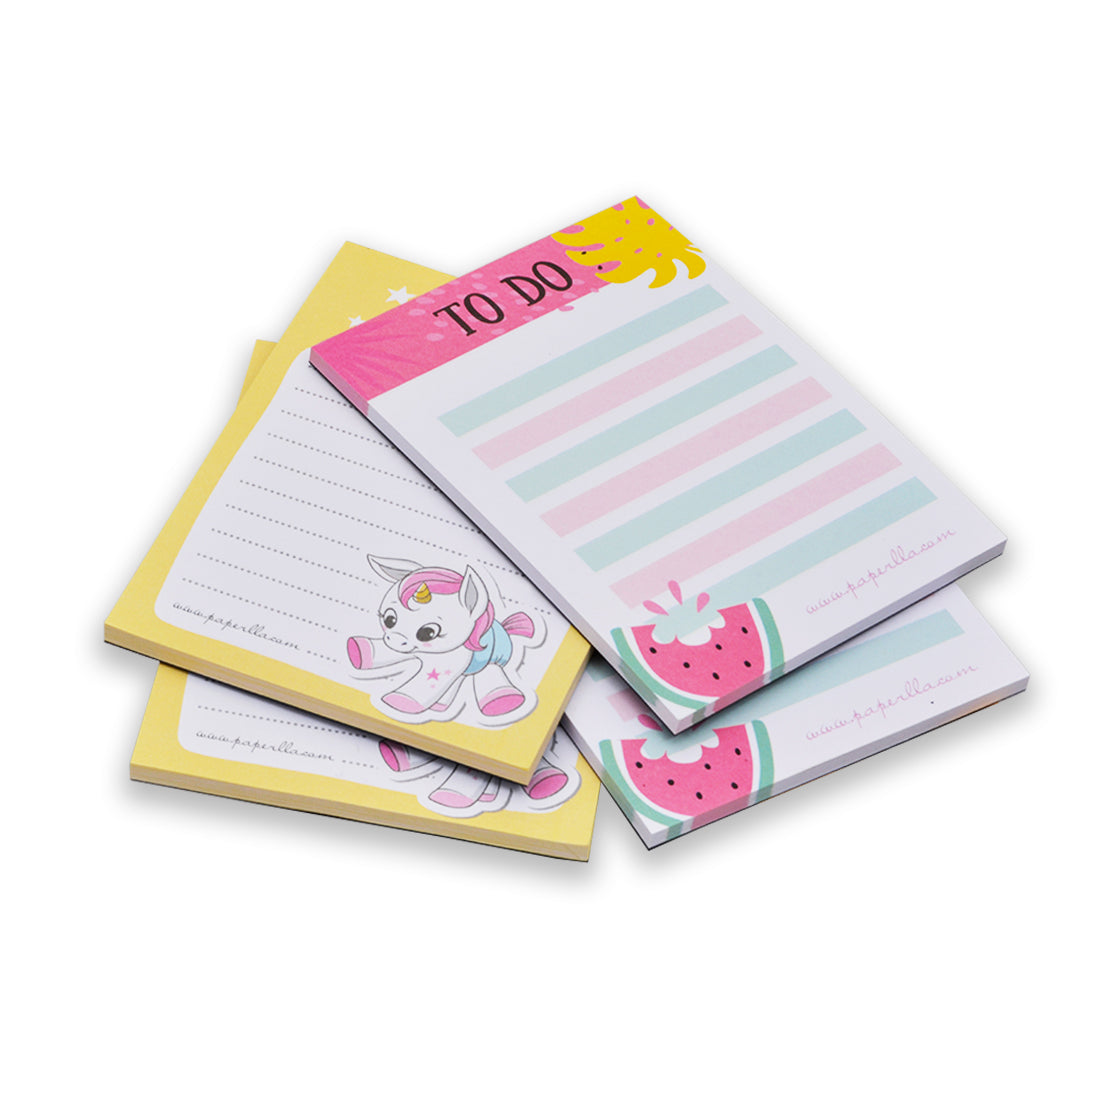 MEMO PADS TRAVEL DIARY , NOTEPADS FOR WRITING NOTES DAILY PLANNER GIFT FOR OFFICE SCHOOL STATIONERY ITEMS SET OF 4